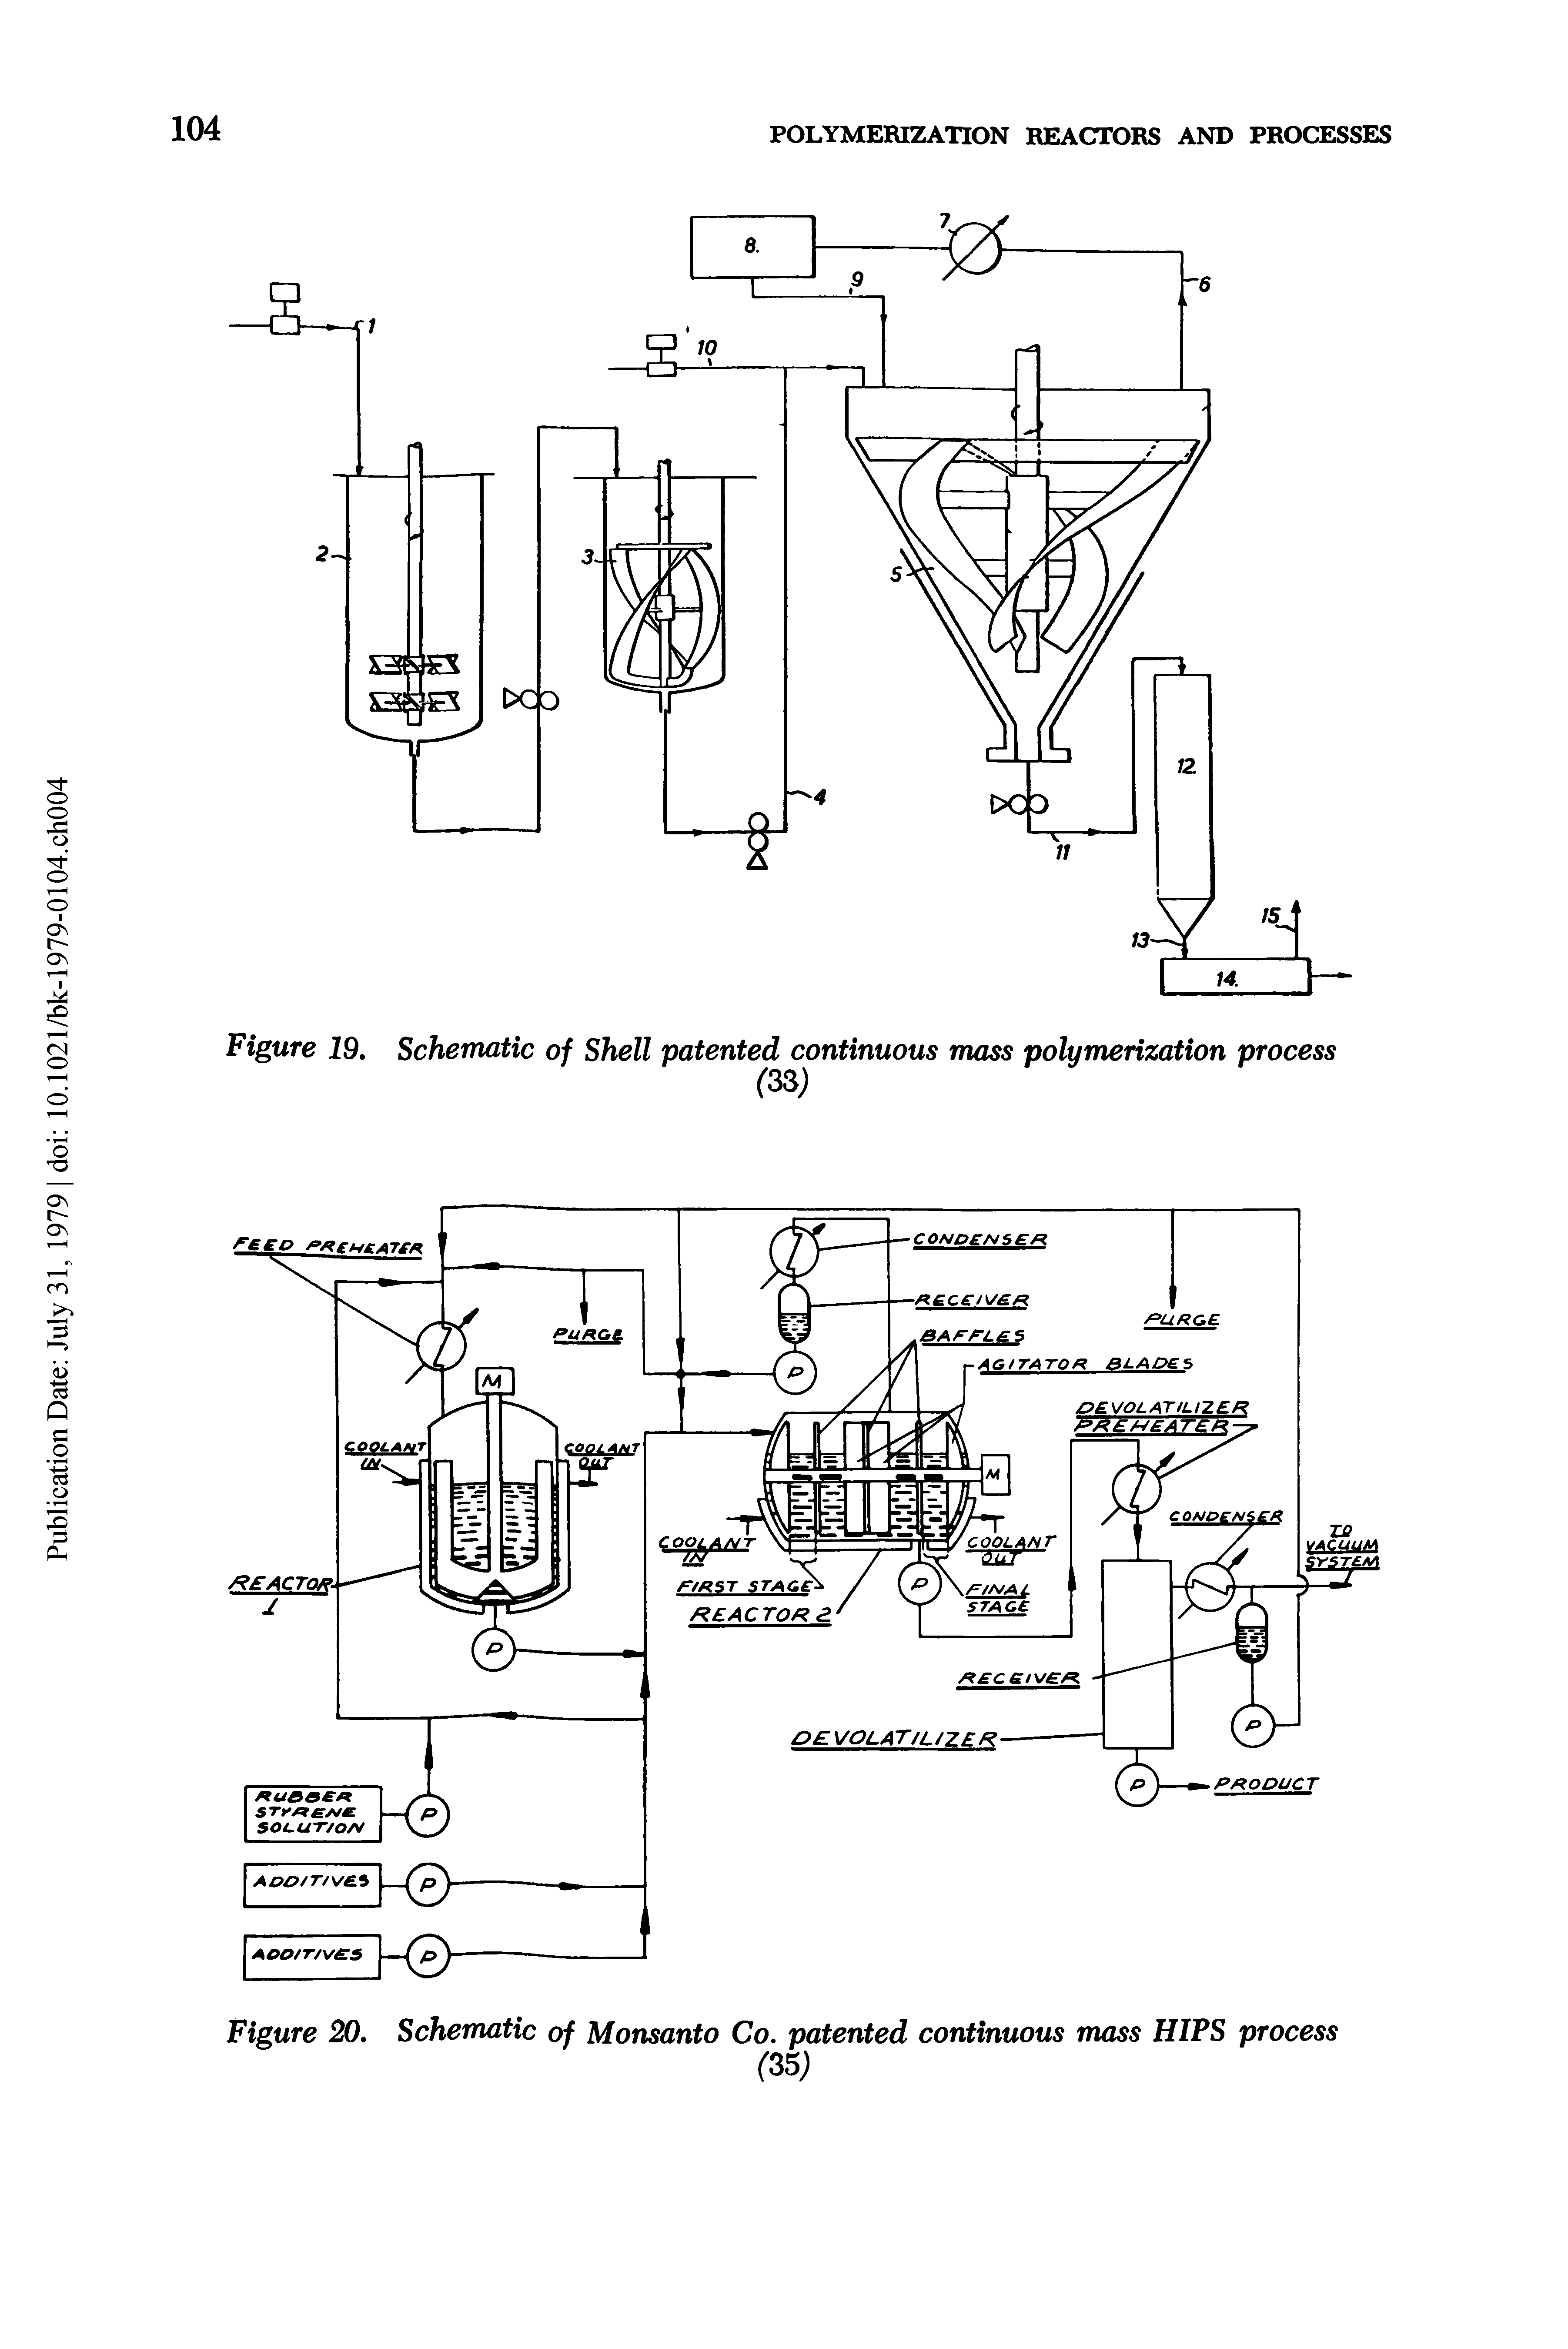 Figure 19. Schematic of Shell patented continuous mass polymerization process...